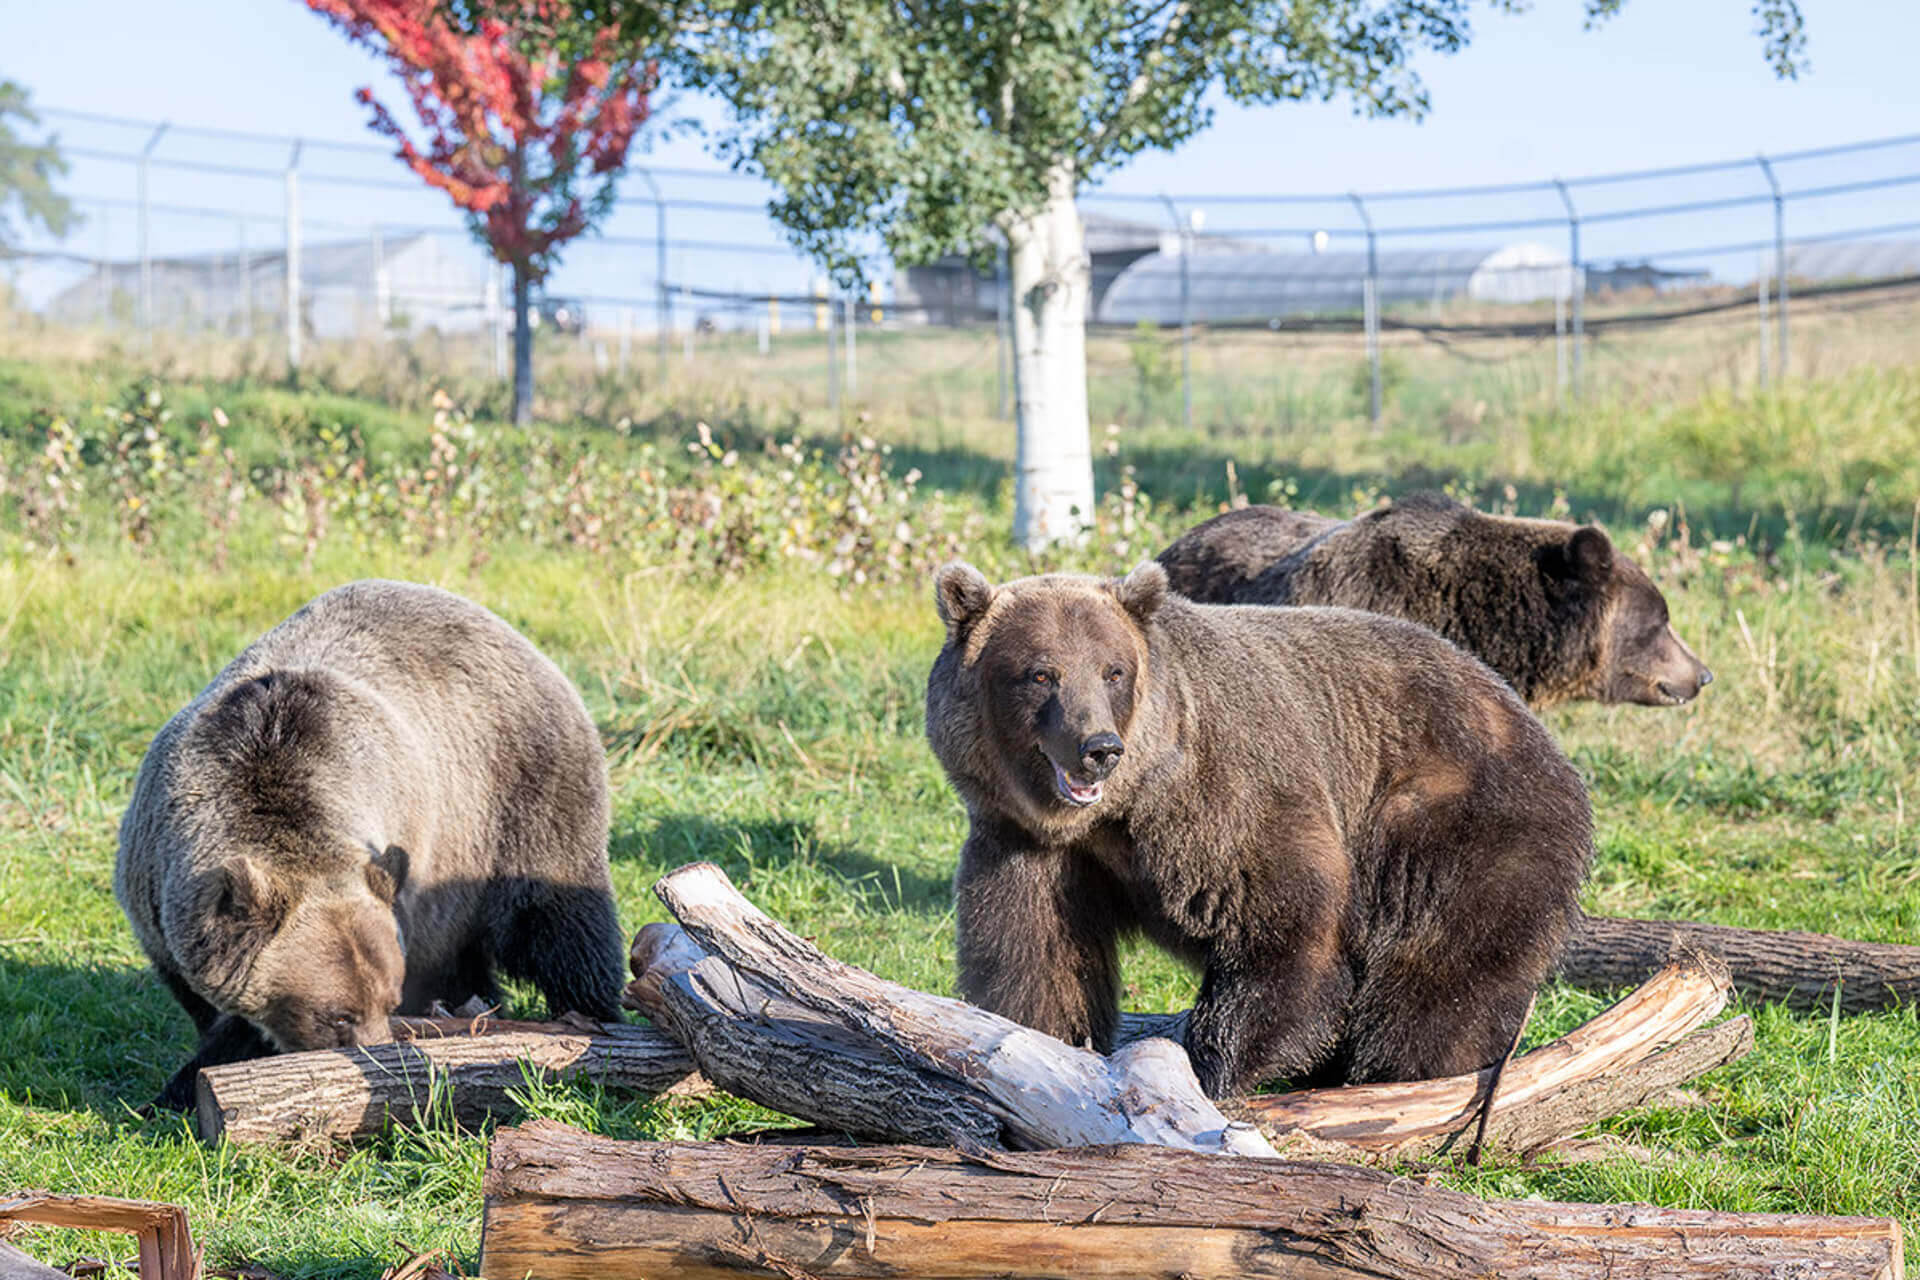 Three grizzly bears at the WSU Bear Center in Pullman WA